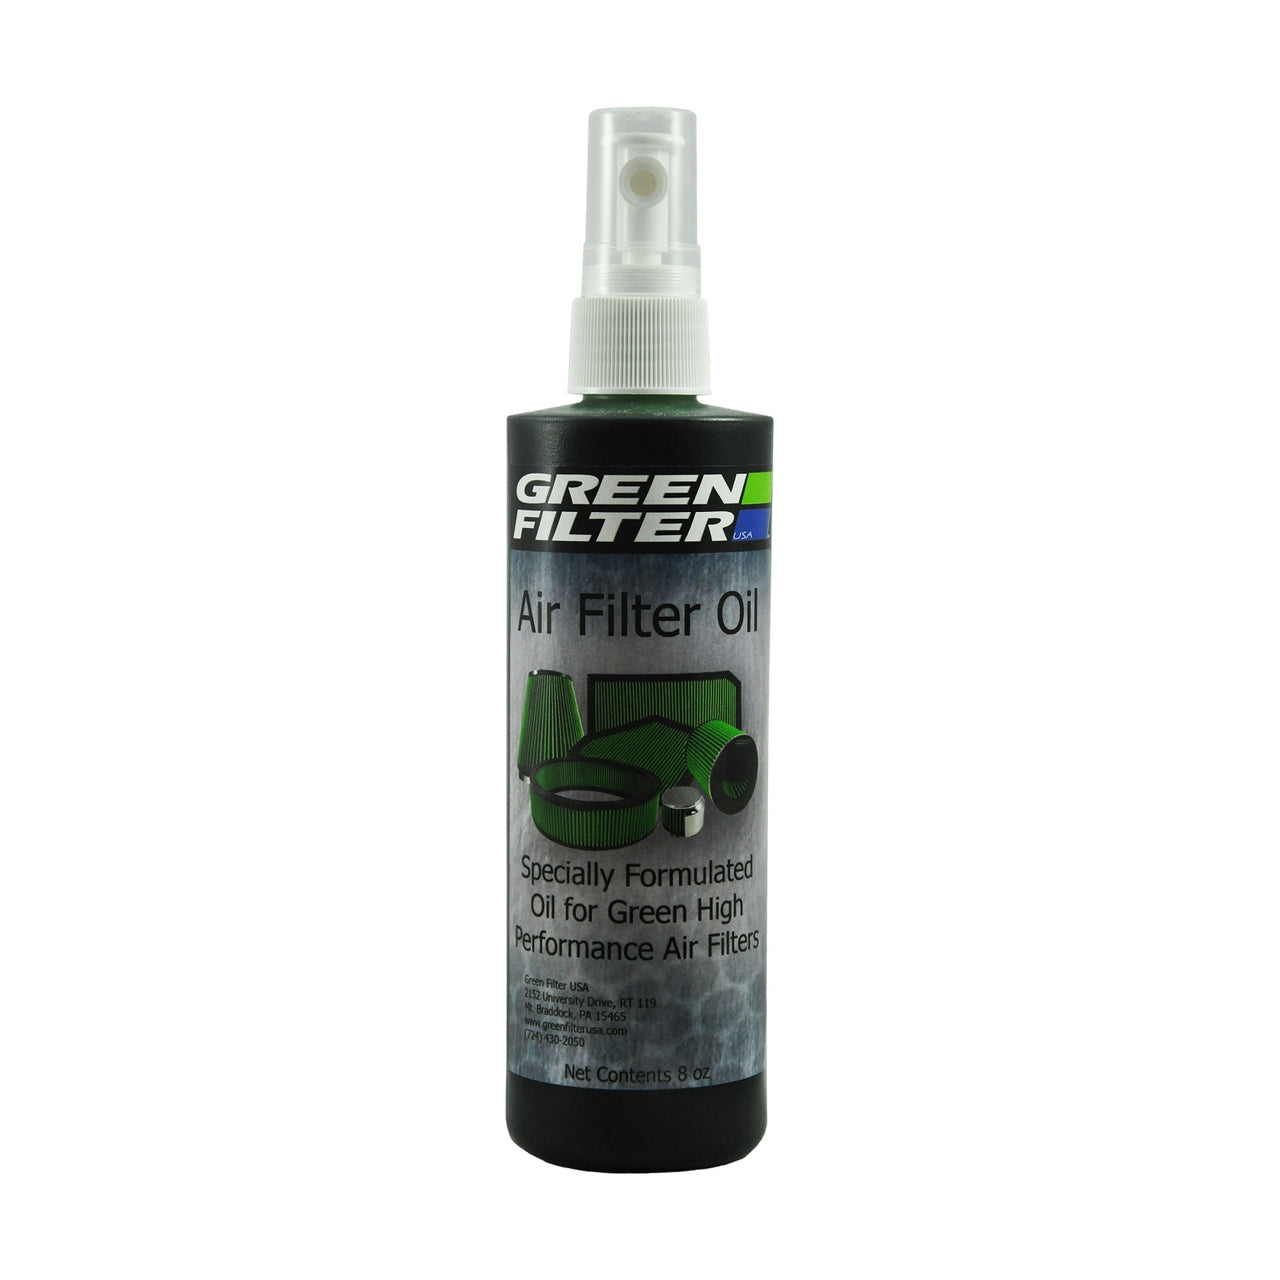 Green Filter Air Filter Synthetic Oil - 8oz.